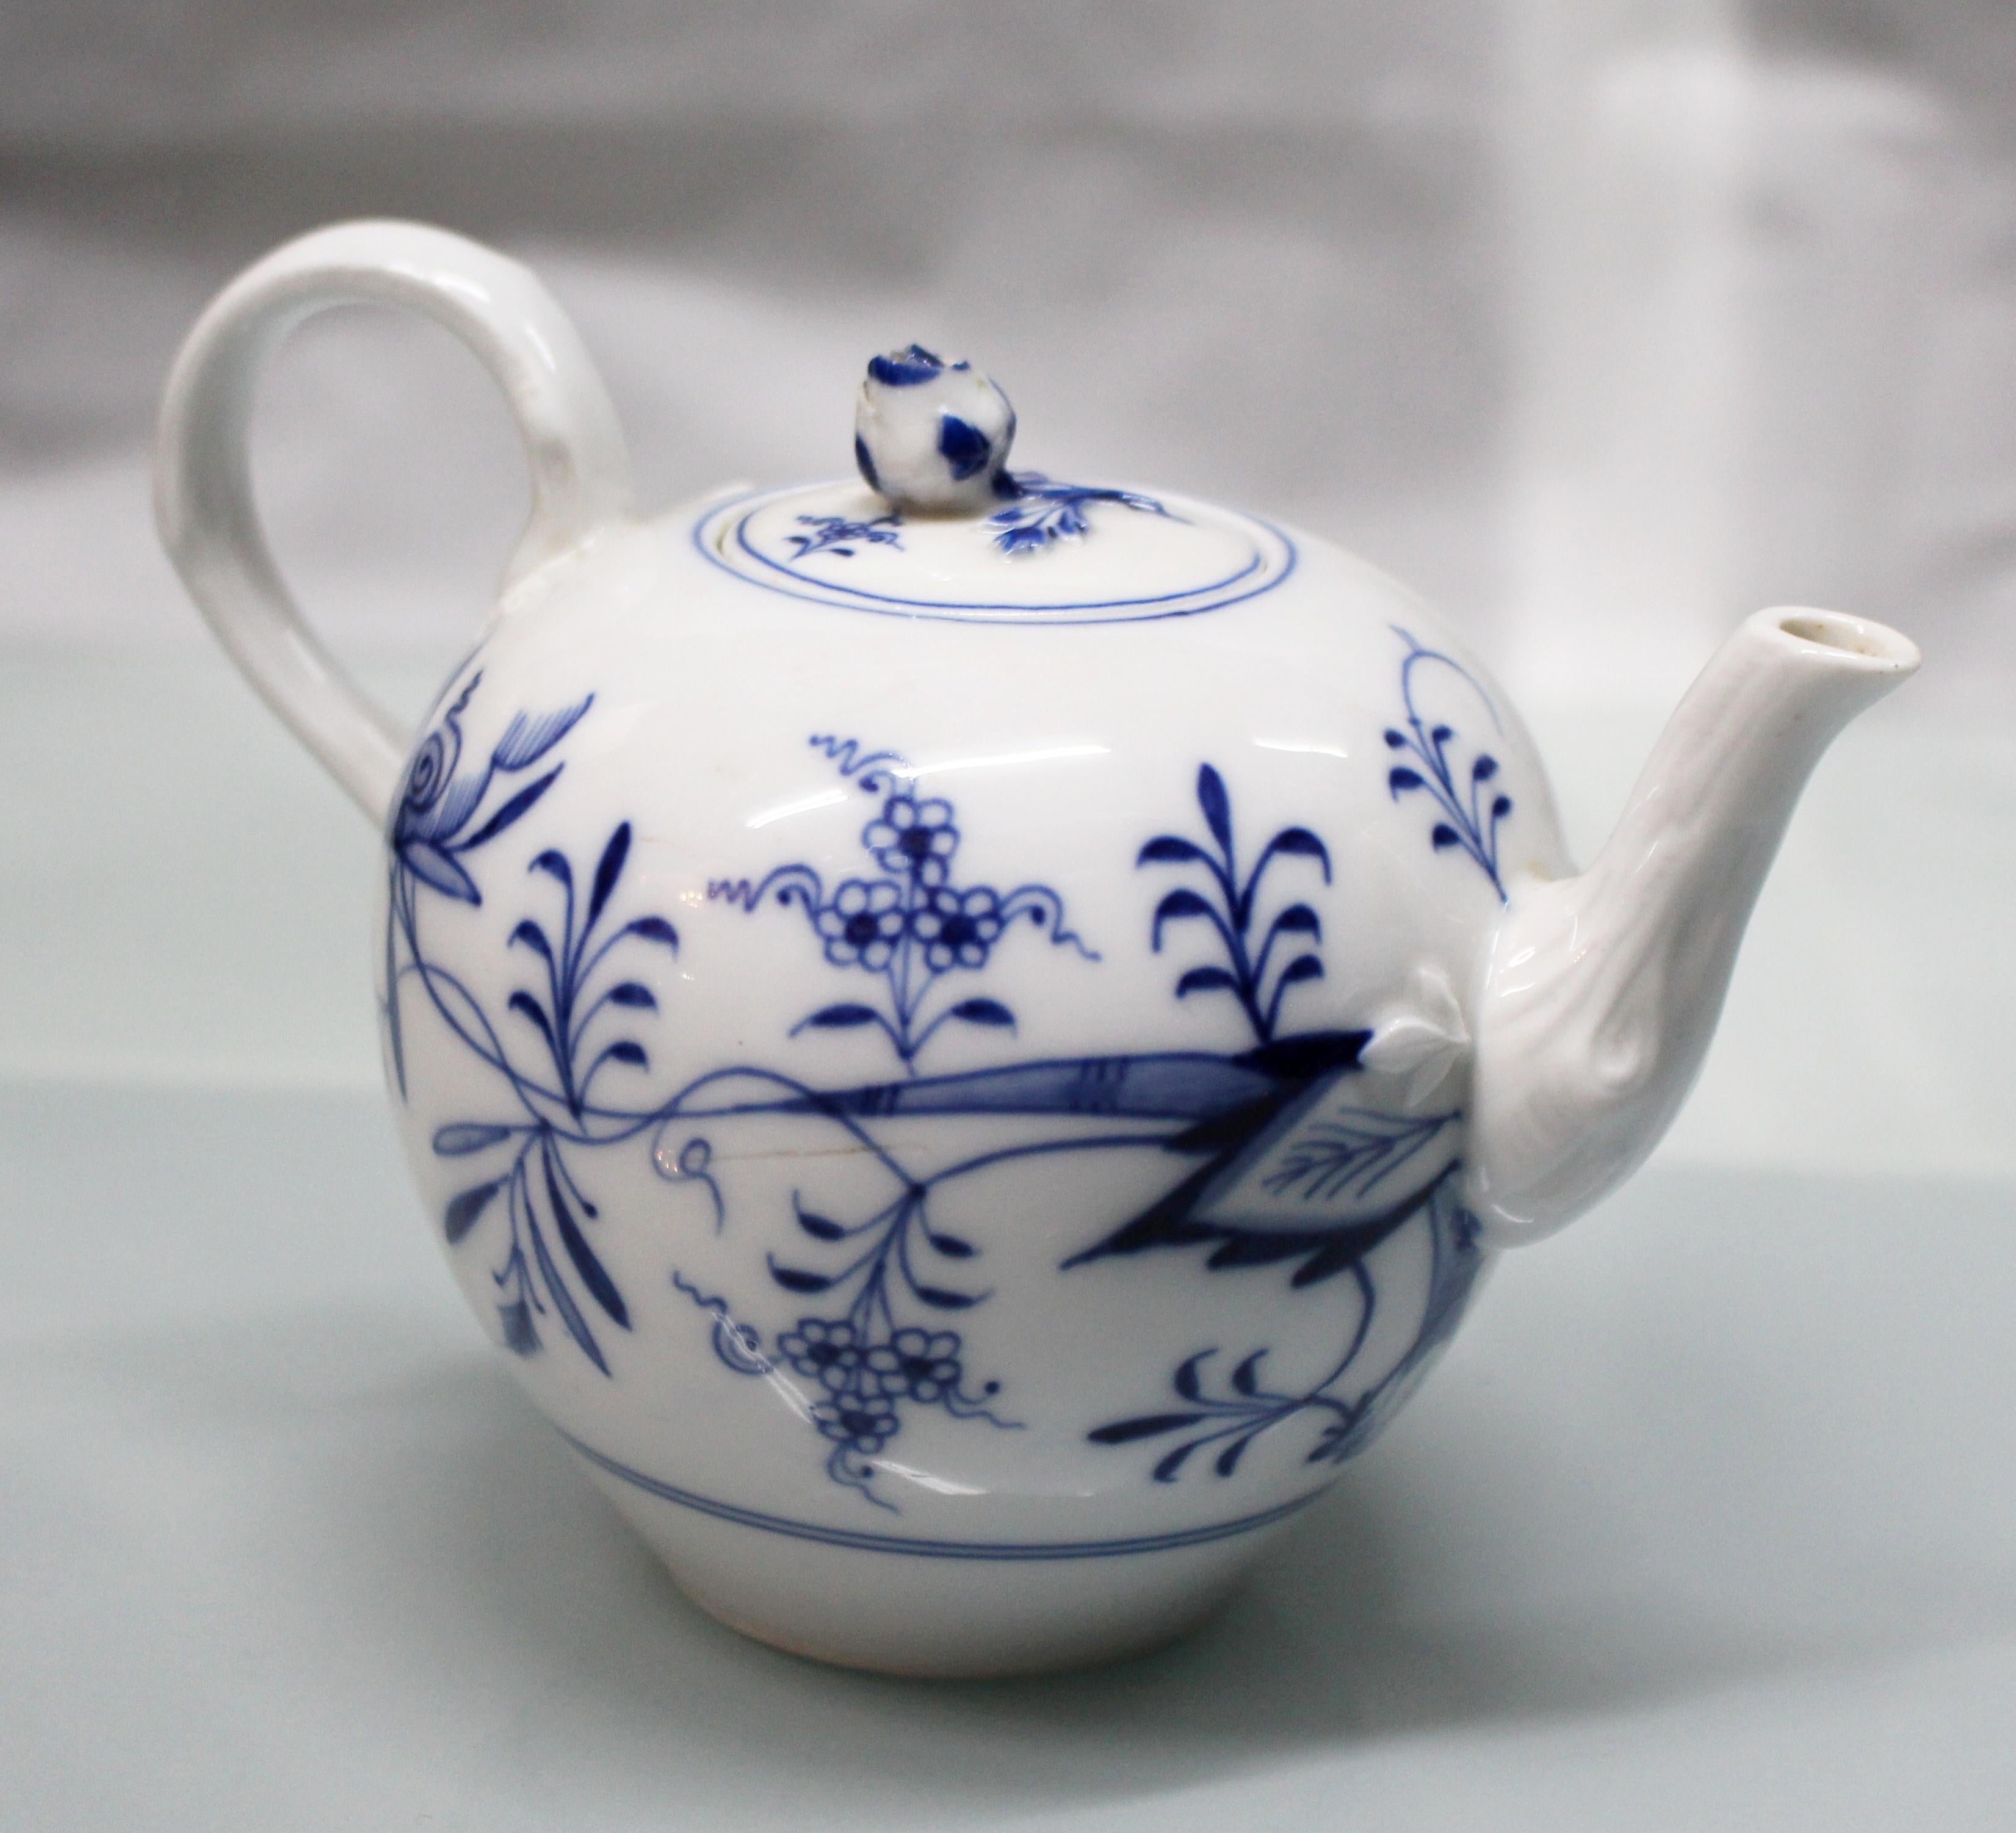 Manufacturer 
Meissen, continental

Pieces 
Teapot & cream jug

Date
Late 19th century

Measures: Teapot height 10.5 cm / 4 in

Cream jug height 9 cm / 3 1/2 in

Decoration blue and white

Condition 
Minor nibbles to flower finial on